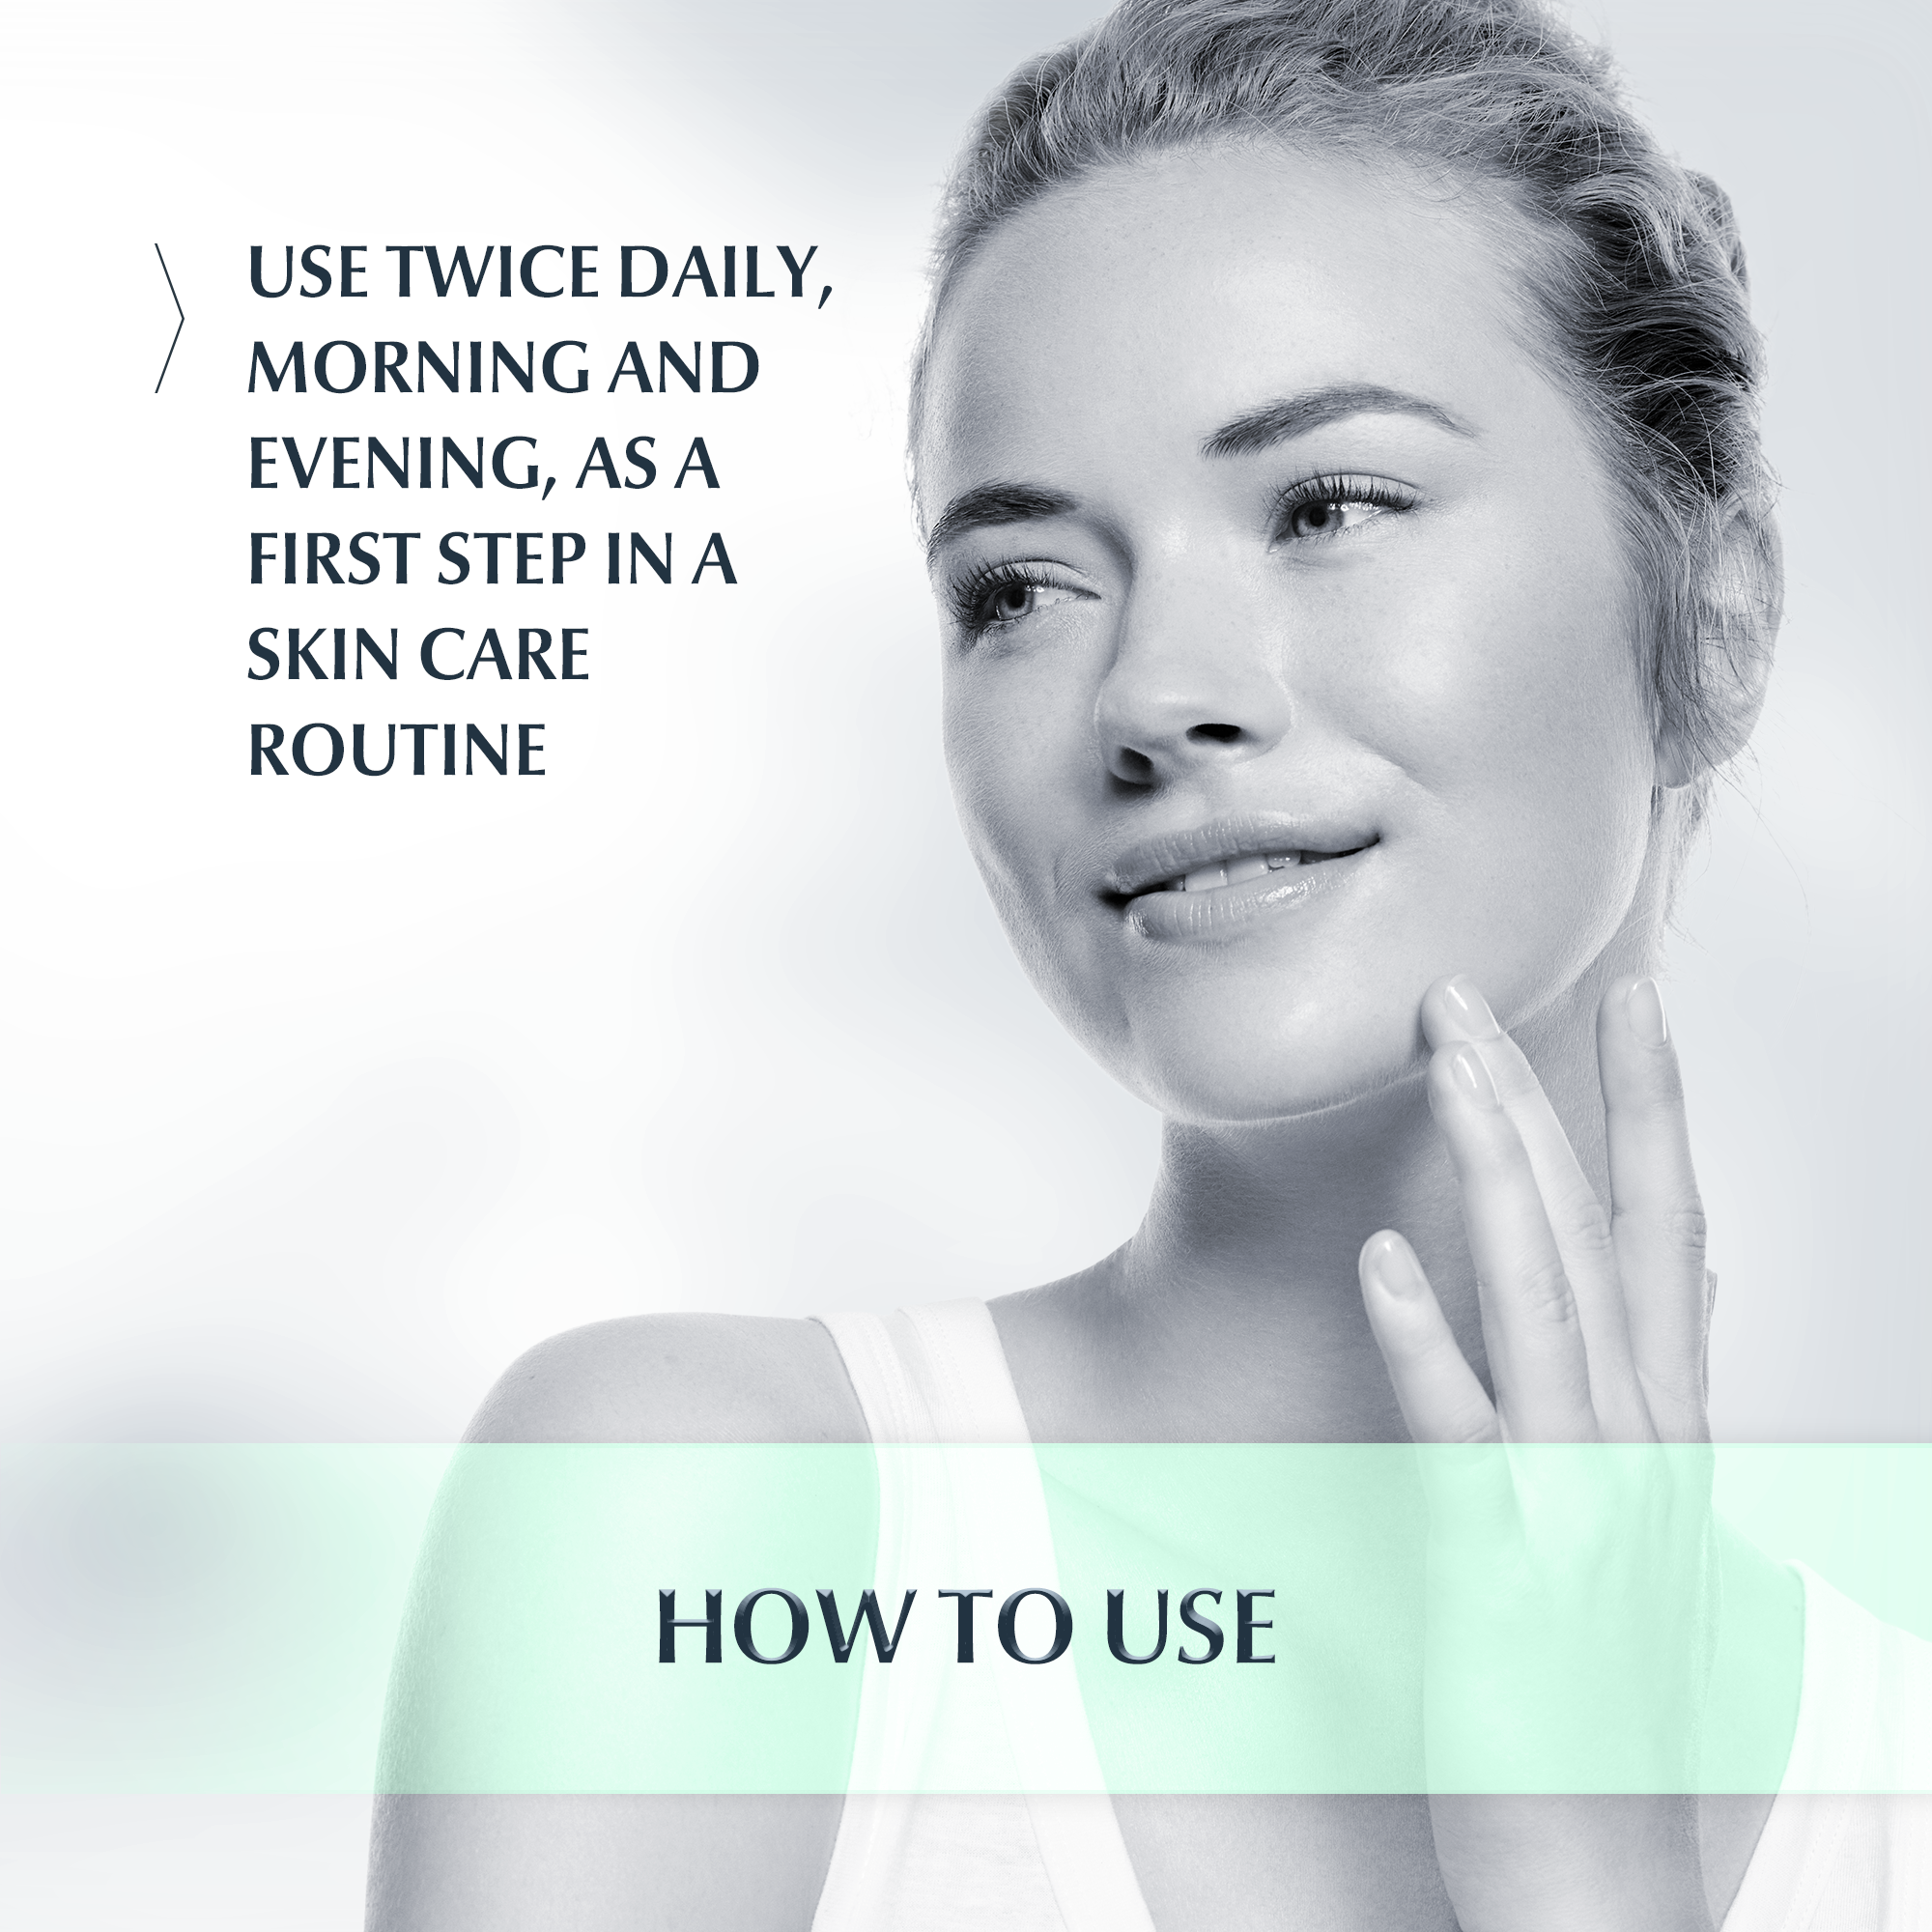 How to use Proacne Cleansing Foam